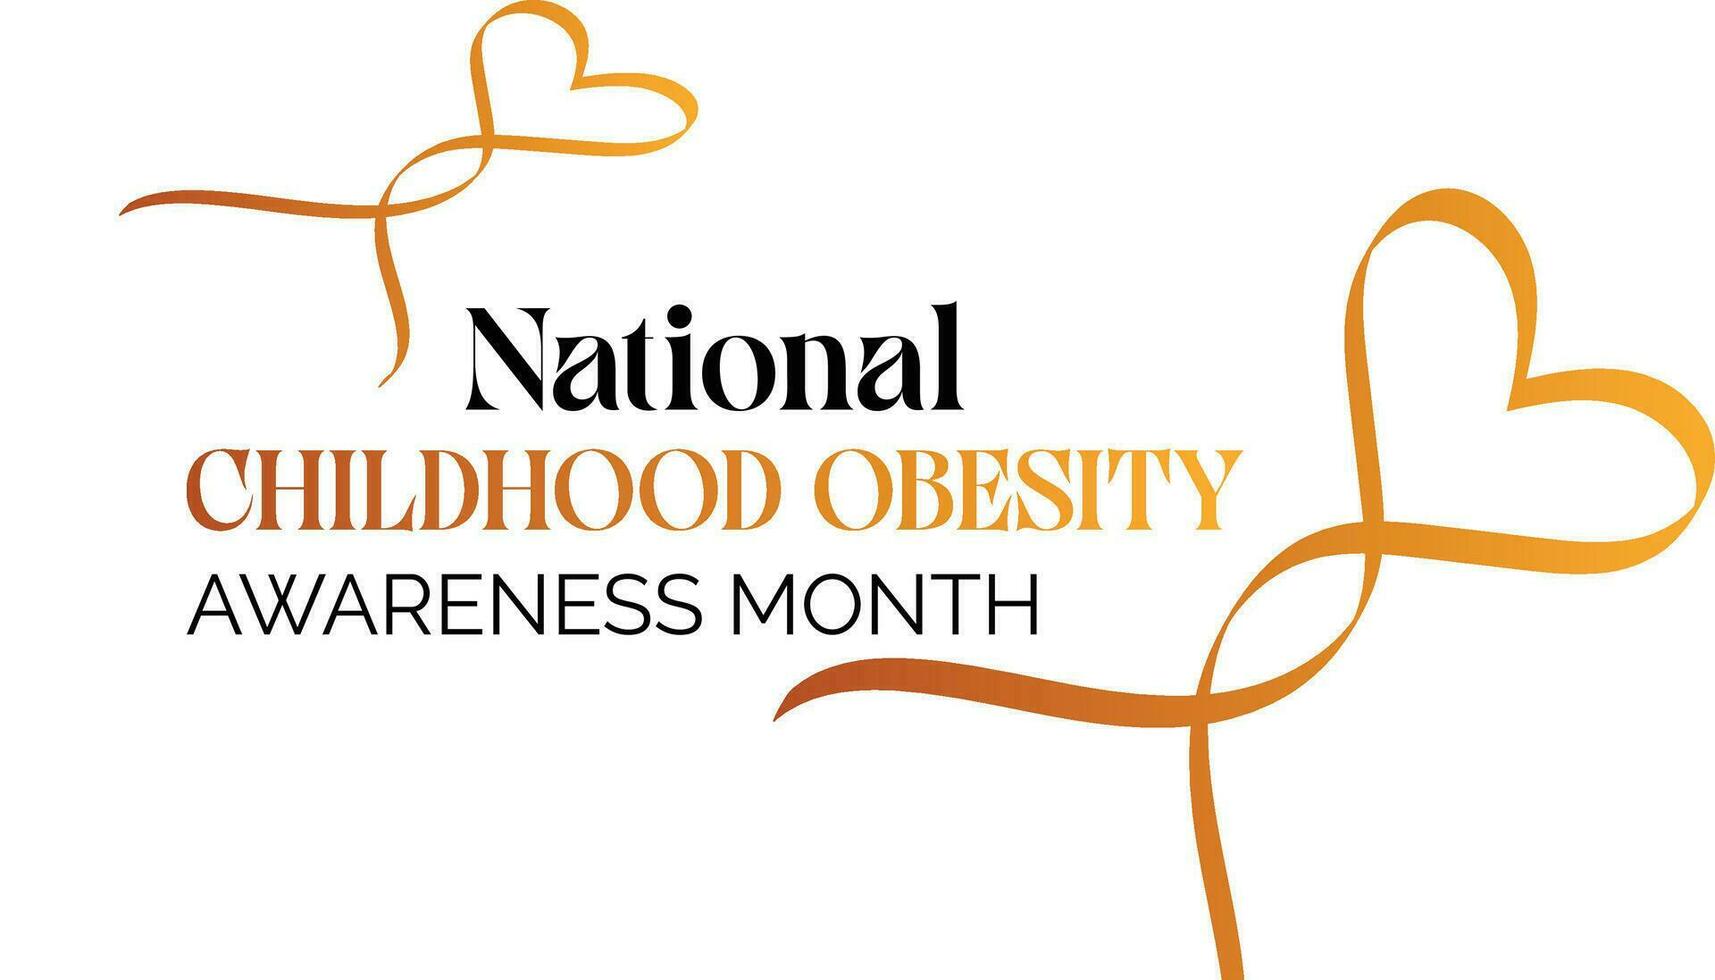 childhood obesity awareness month observed each year during September . Vector illustration on the theme of .